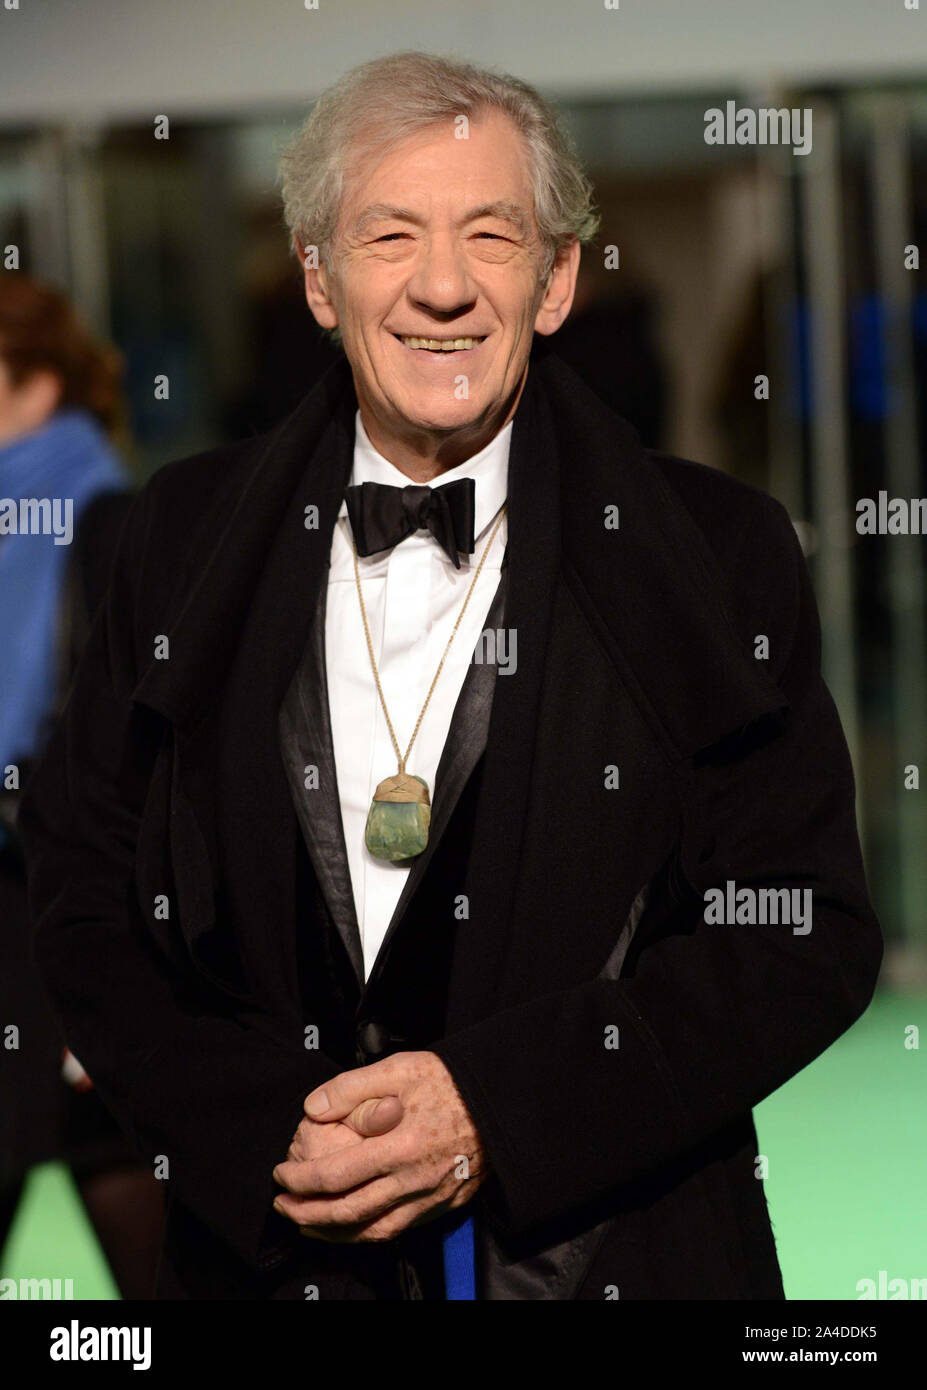 Photo Must Be Credited ©Karwai Tang/Alpha Press 076775 12/12/12 Sir Ian McKellen at the Royal Film Performance 2012 The Hobbit An Unexpected Journey Movie Premiere held at the Odeon in Leicester Square, London Stock Photo